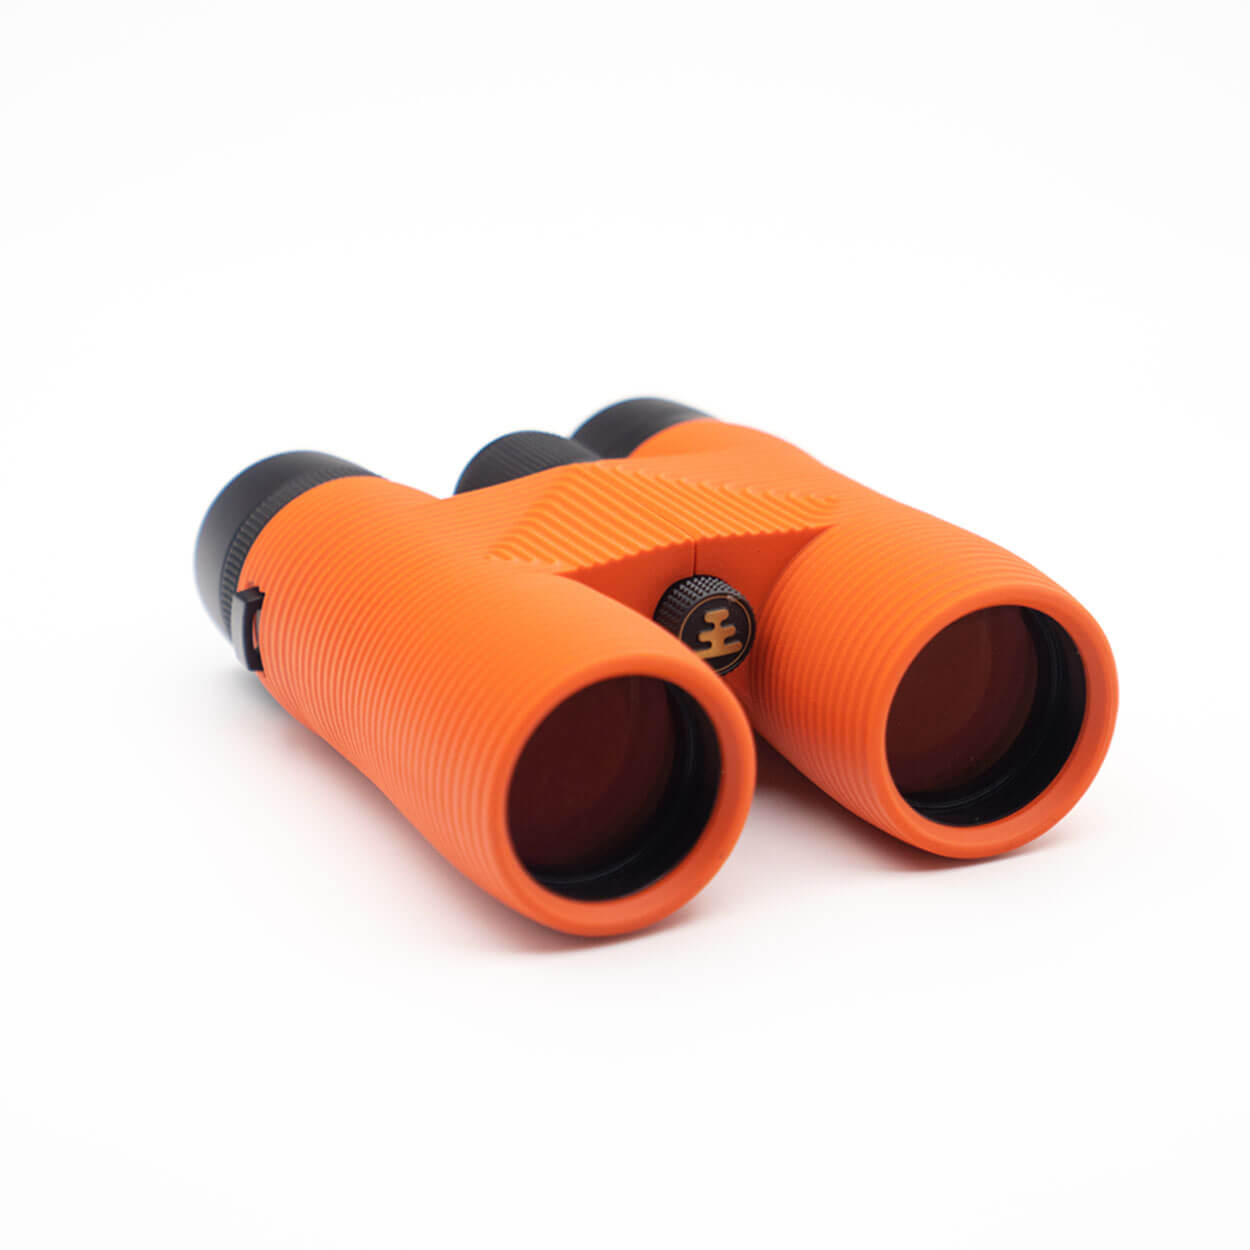 Featured product image for PERSIMMON (ORANGE)